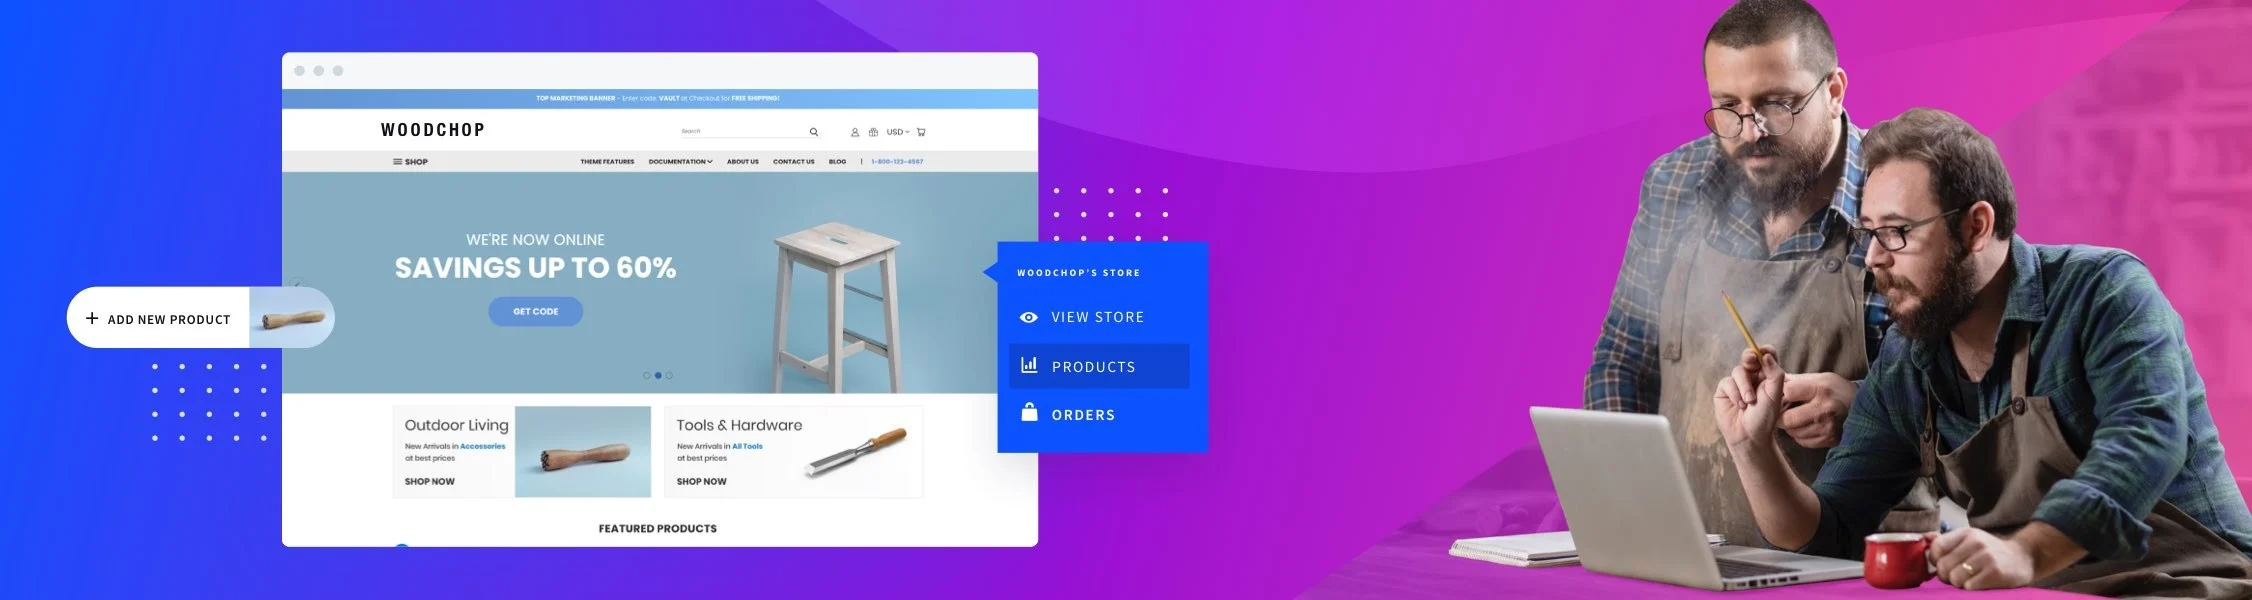 12 Best Ecommerce CMS for Your Online Store (and why)